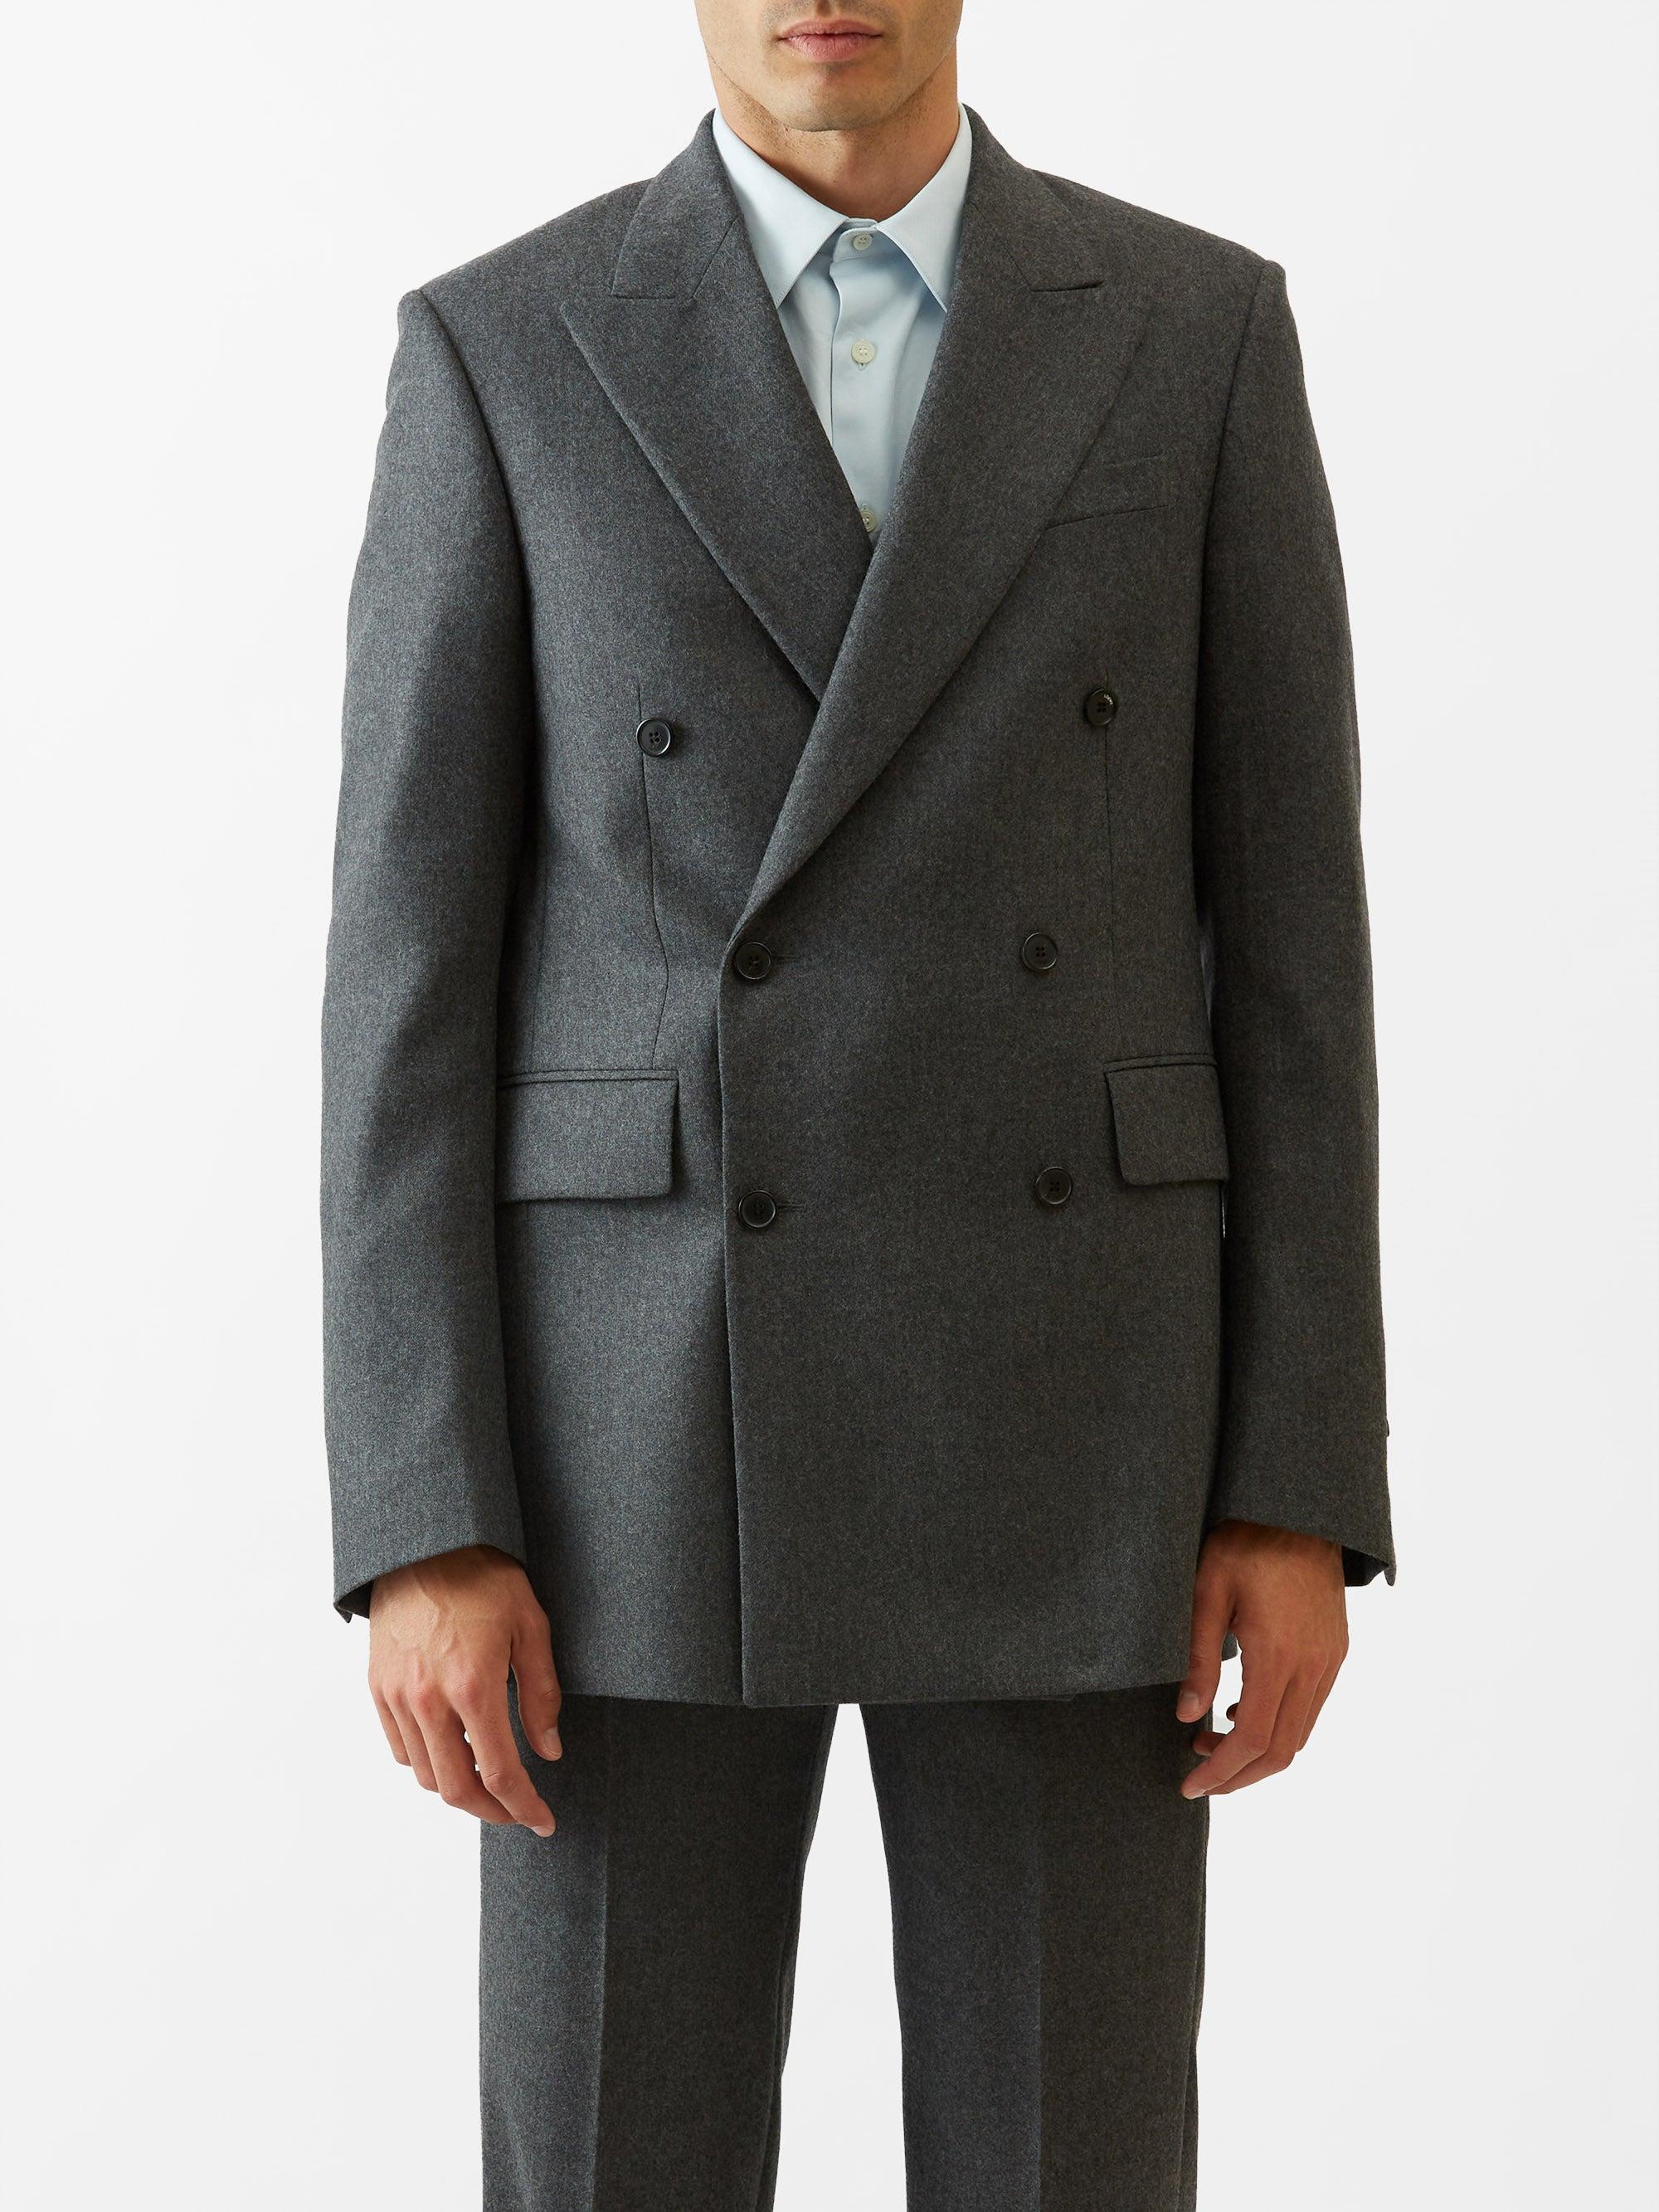 Loewe Double-breasted Wool Suit Jacket in Gray for Men | Lyst